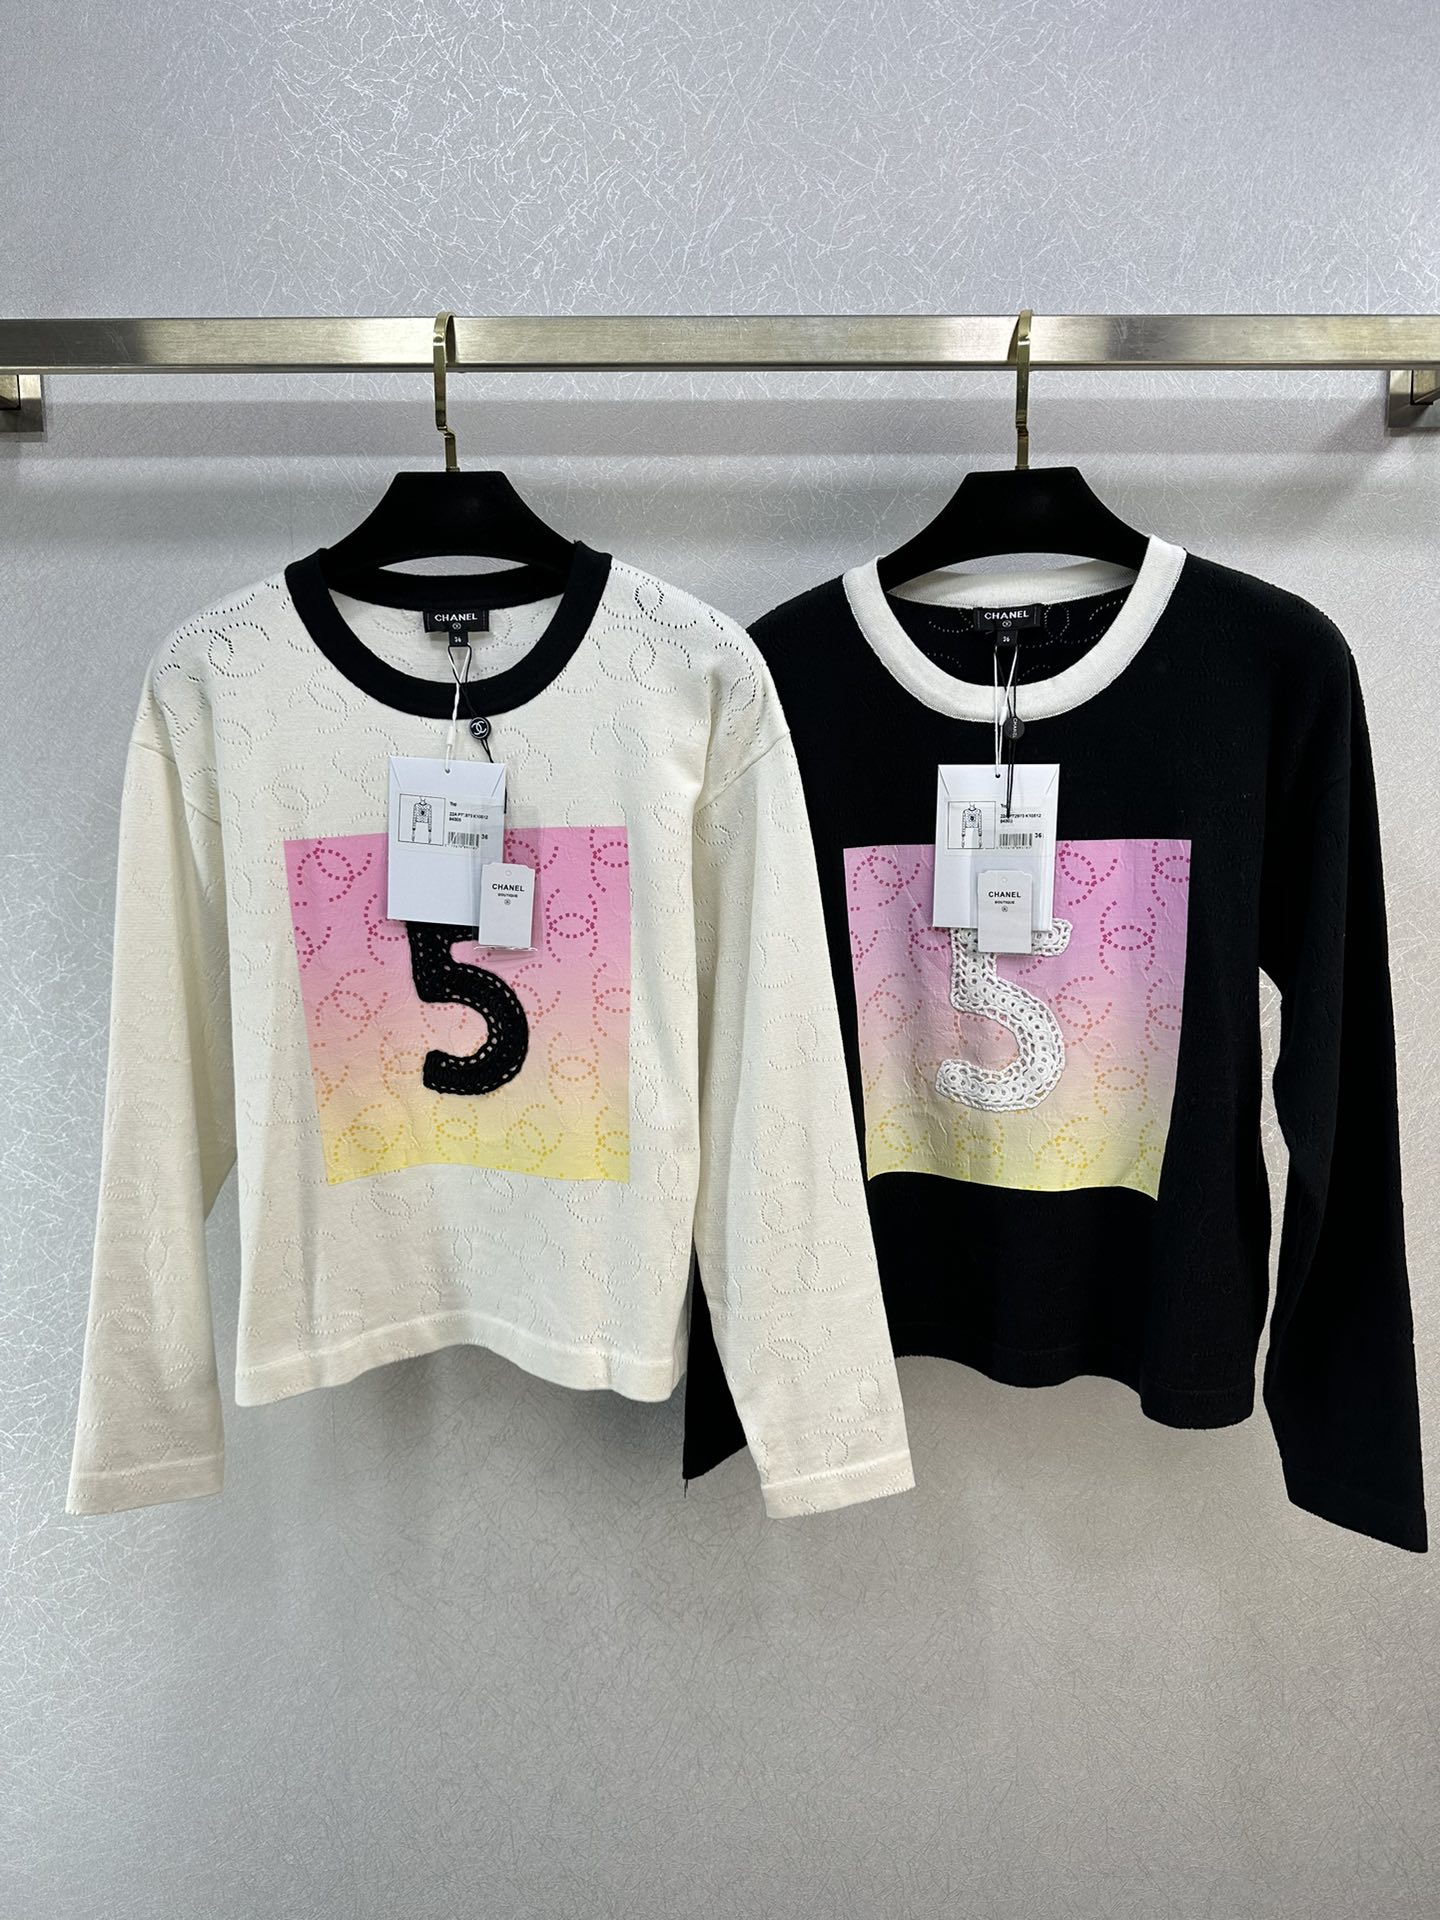 Chanel Clothing Knit Sweater Embroidery Knitting